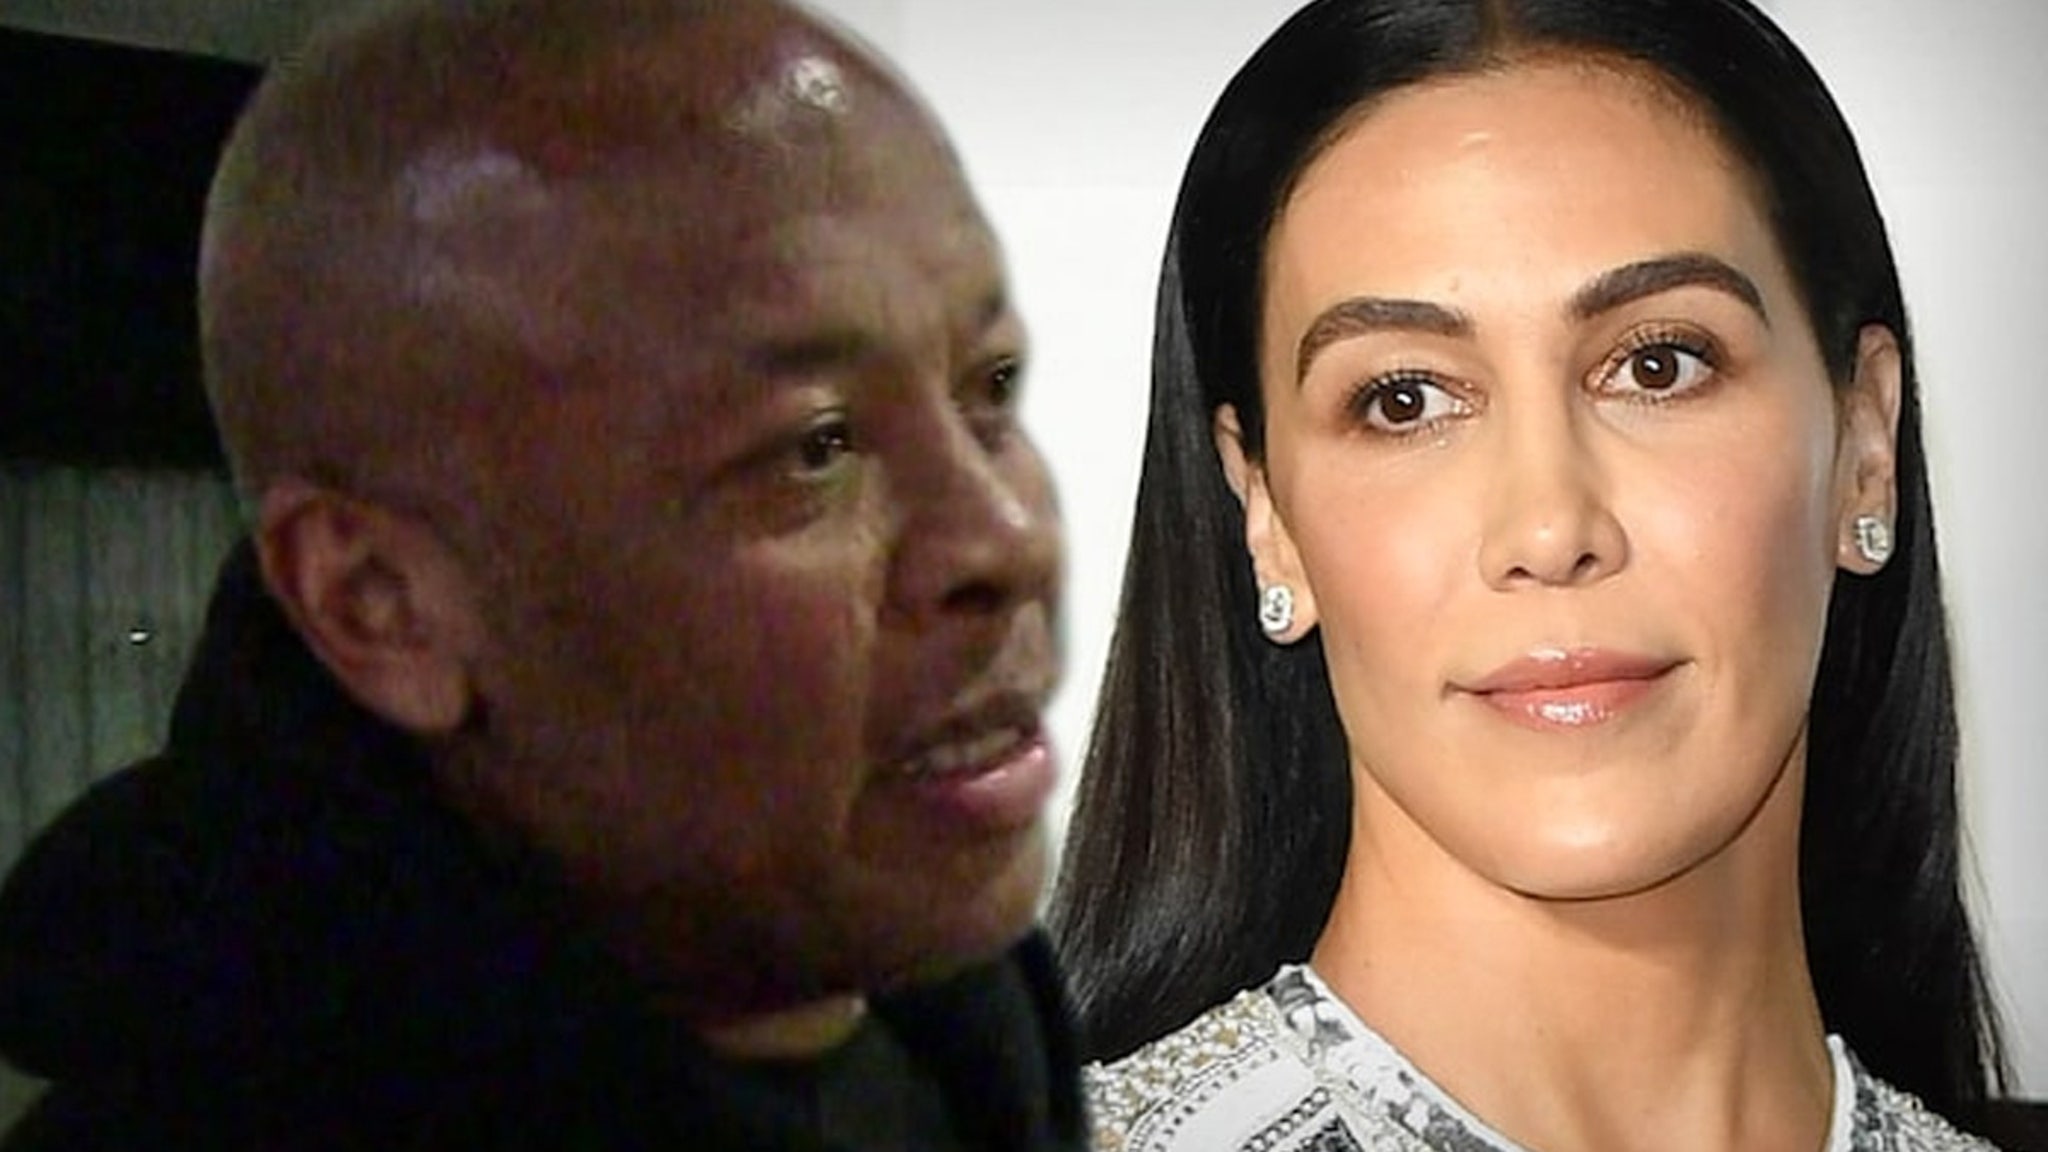 Dr.  Dre Files Prenup says all property is separate, but she gets spousal support